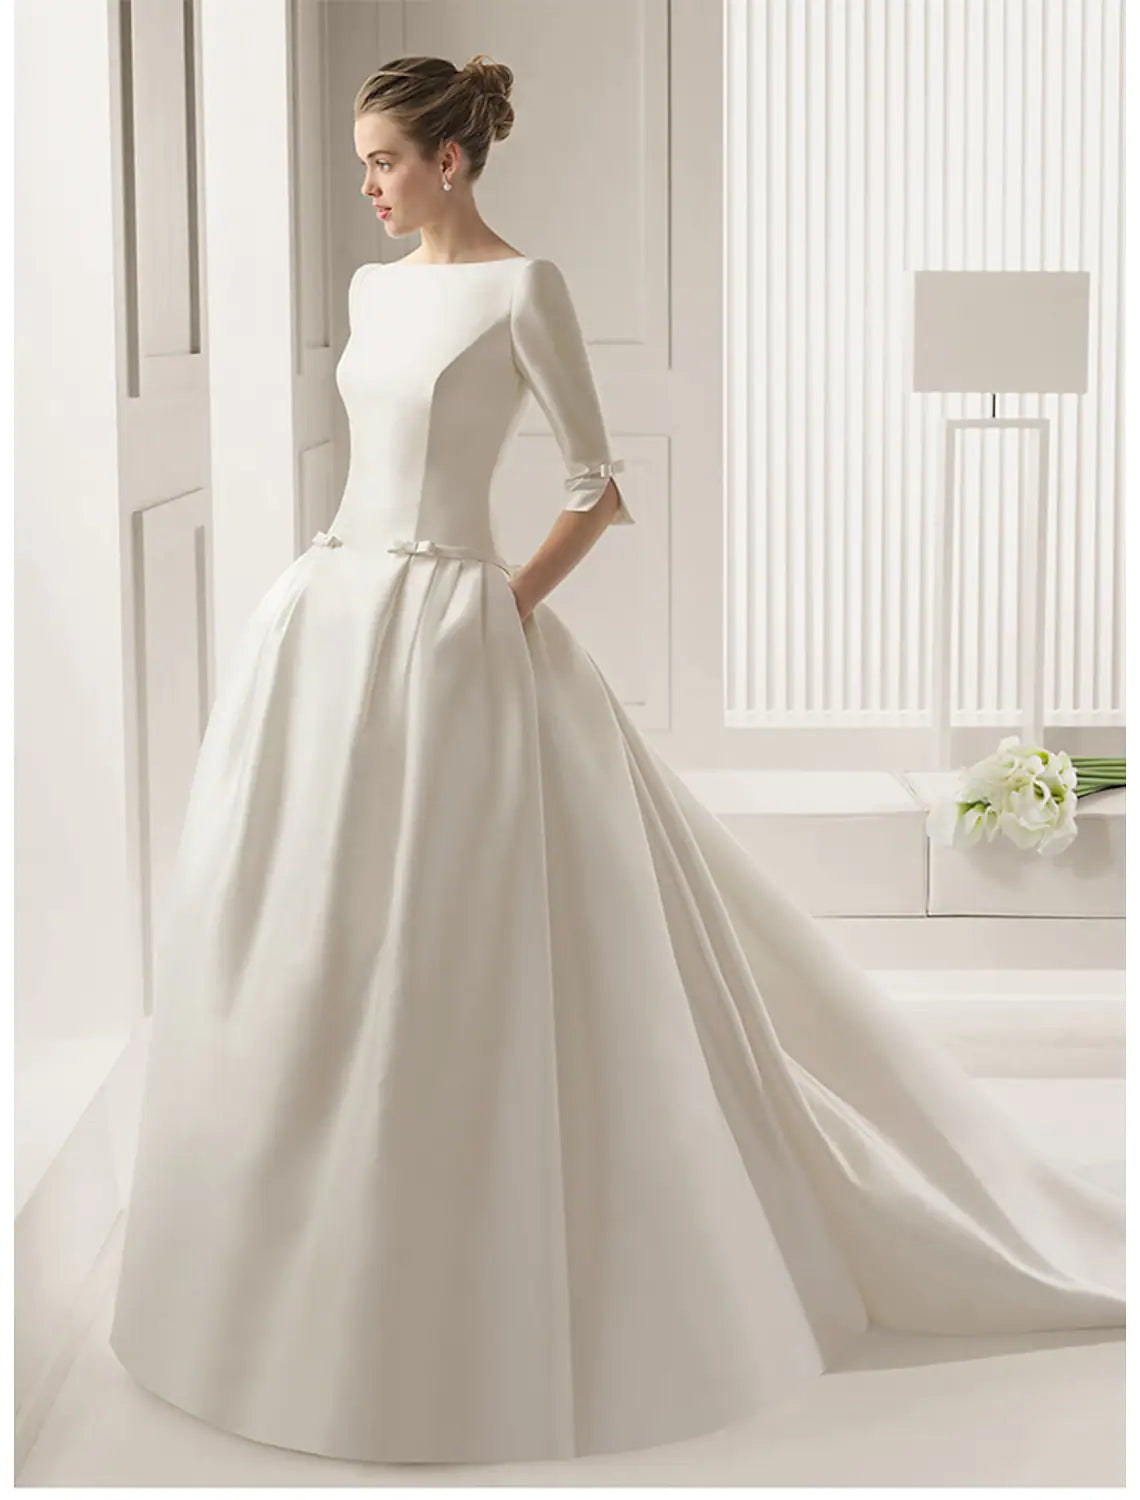 Engagement Formal Wedding Dresses A-Line Half Sleeve With Bow(s) Pleats